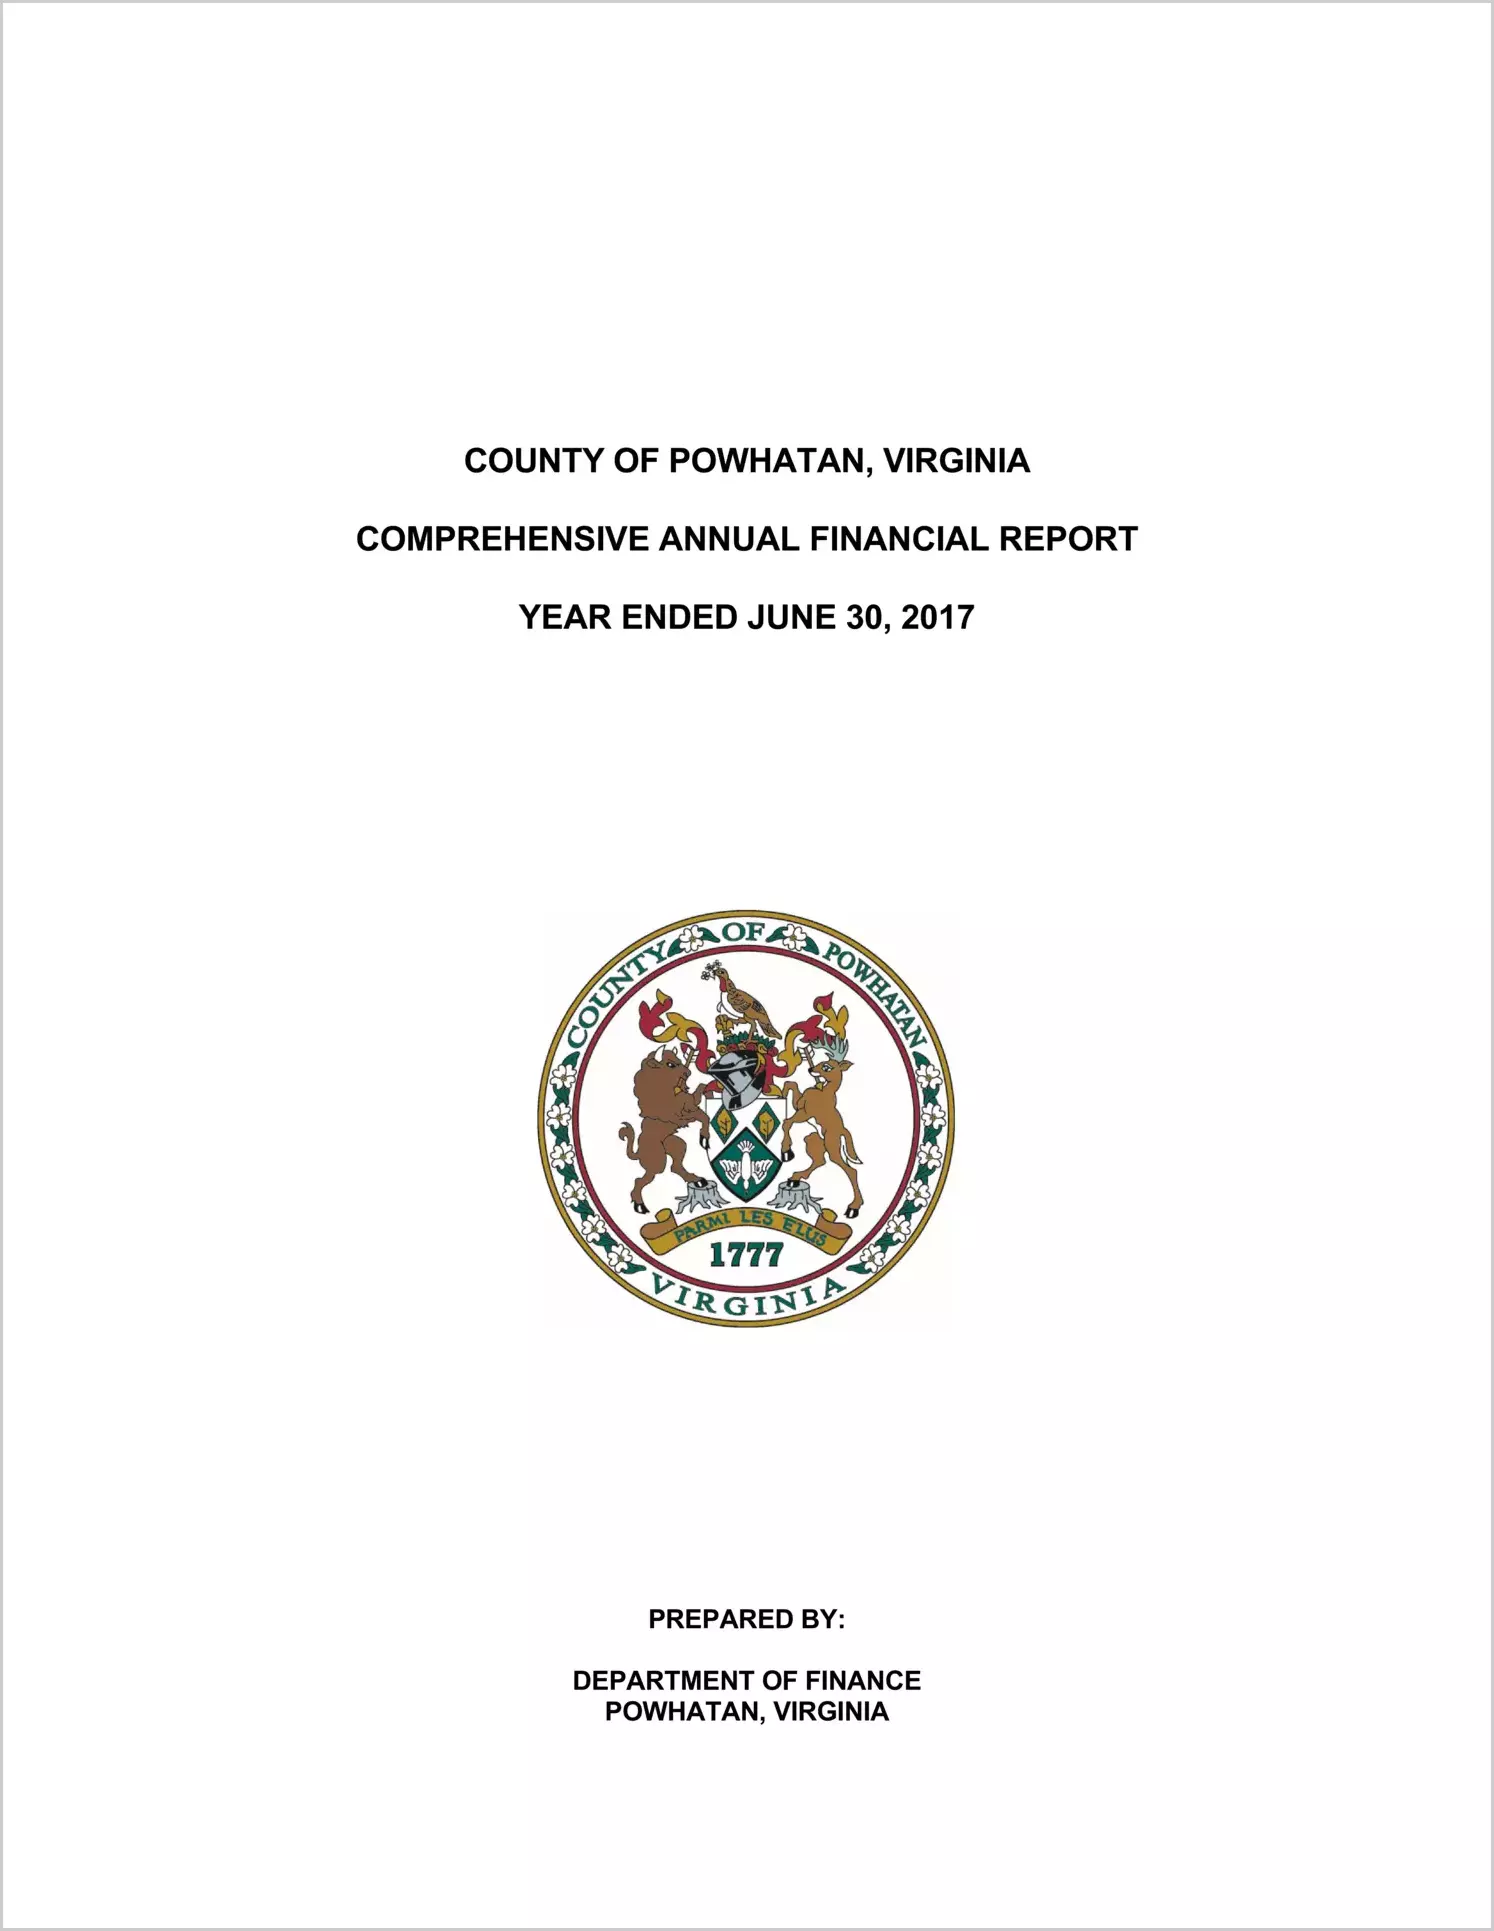 2017 Annual Financial Report for County of Powhatan